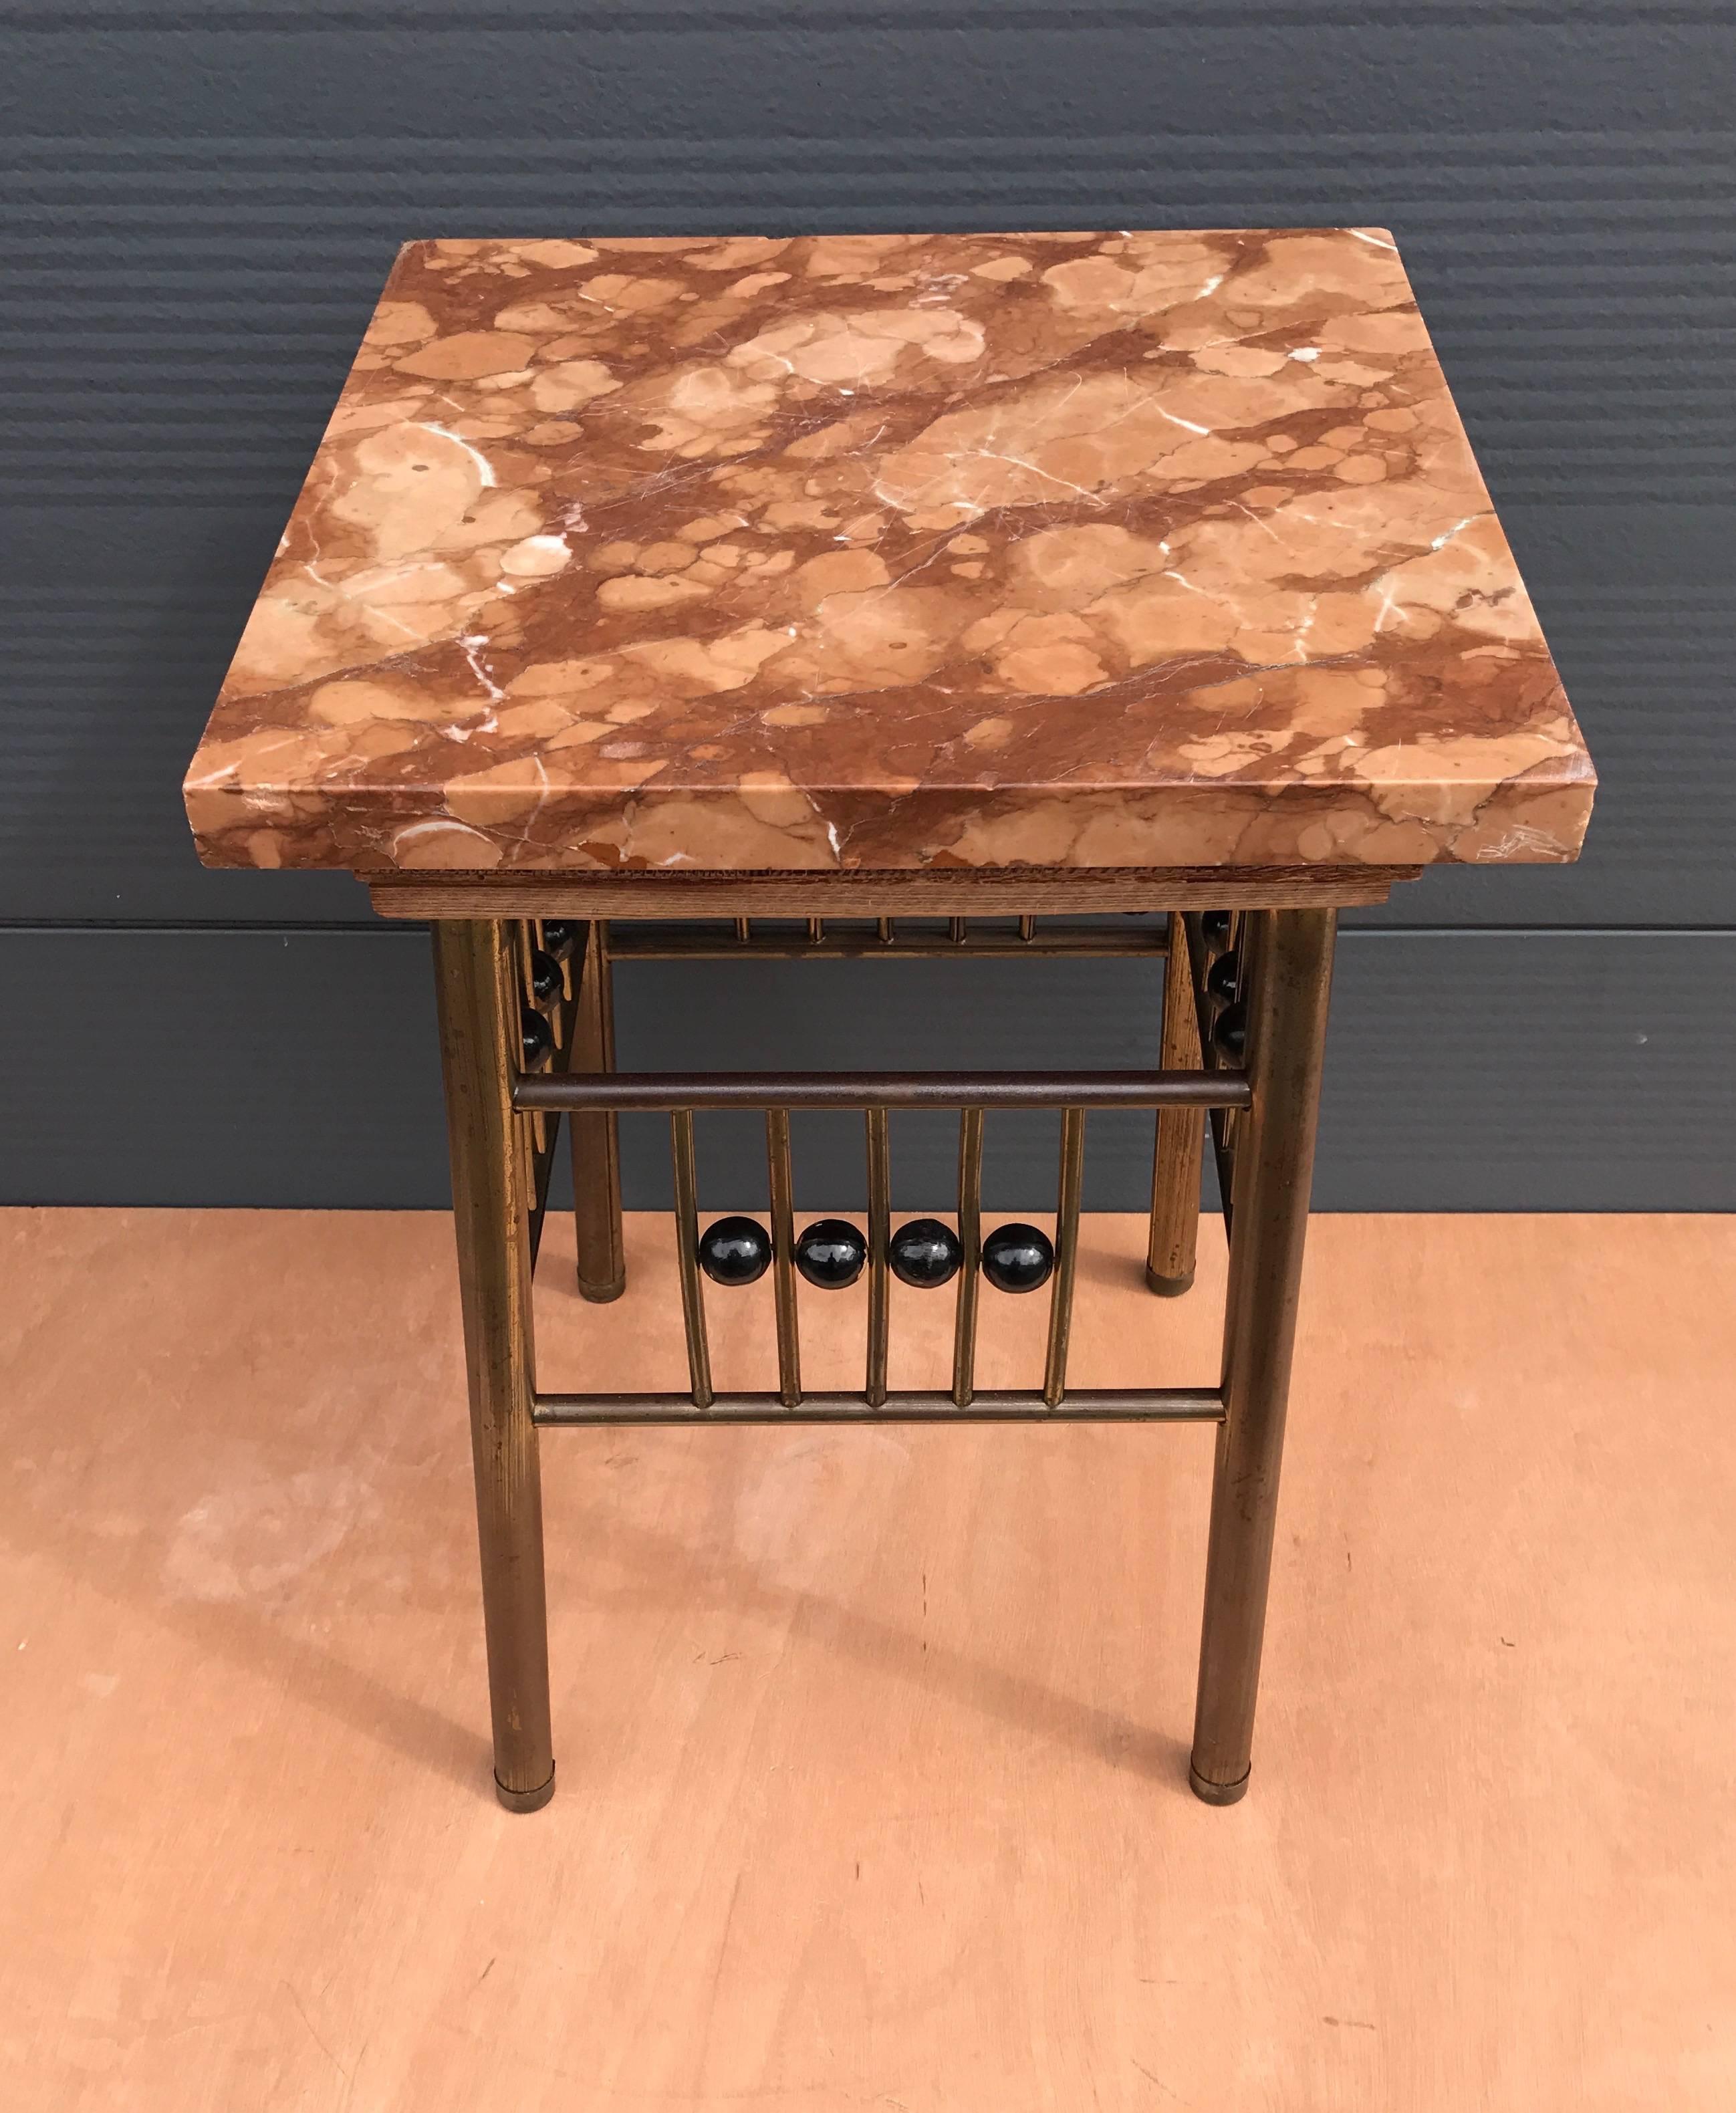 Modernist display stand from the turn of the century. 

This brass Viennese Secession plant stand is in the style of Koloman Moser and it is a beautiful and timeless design. The marble top was put on at a later date, but it goes very well with the